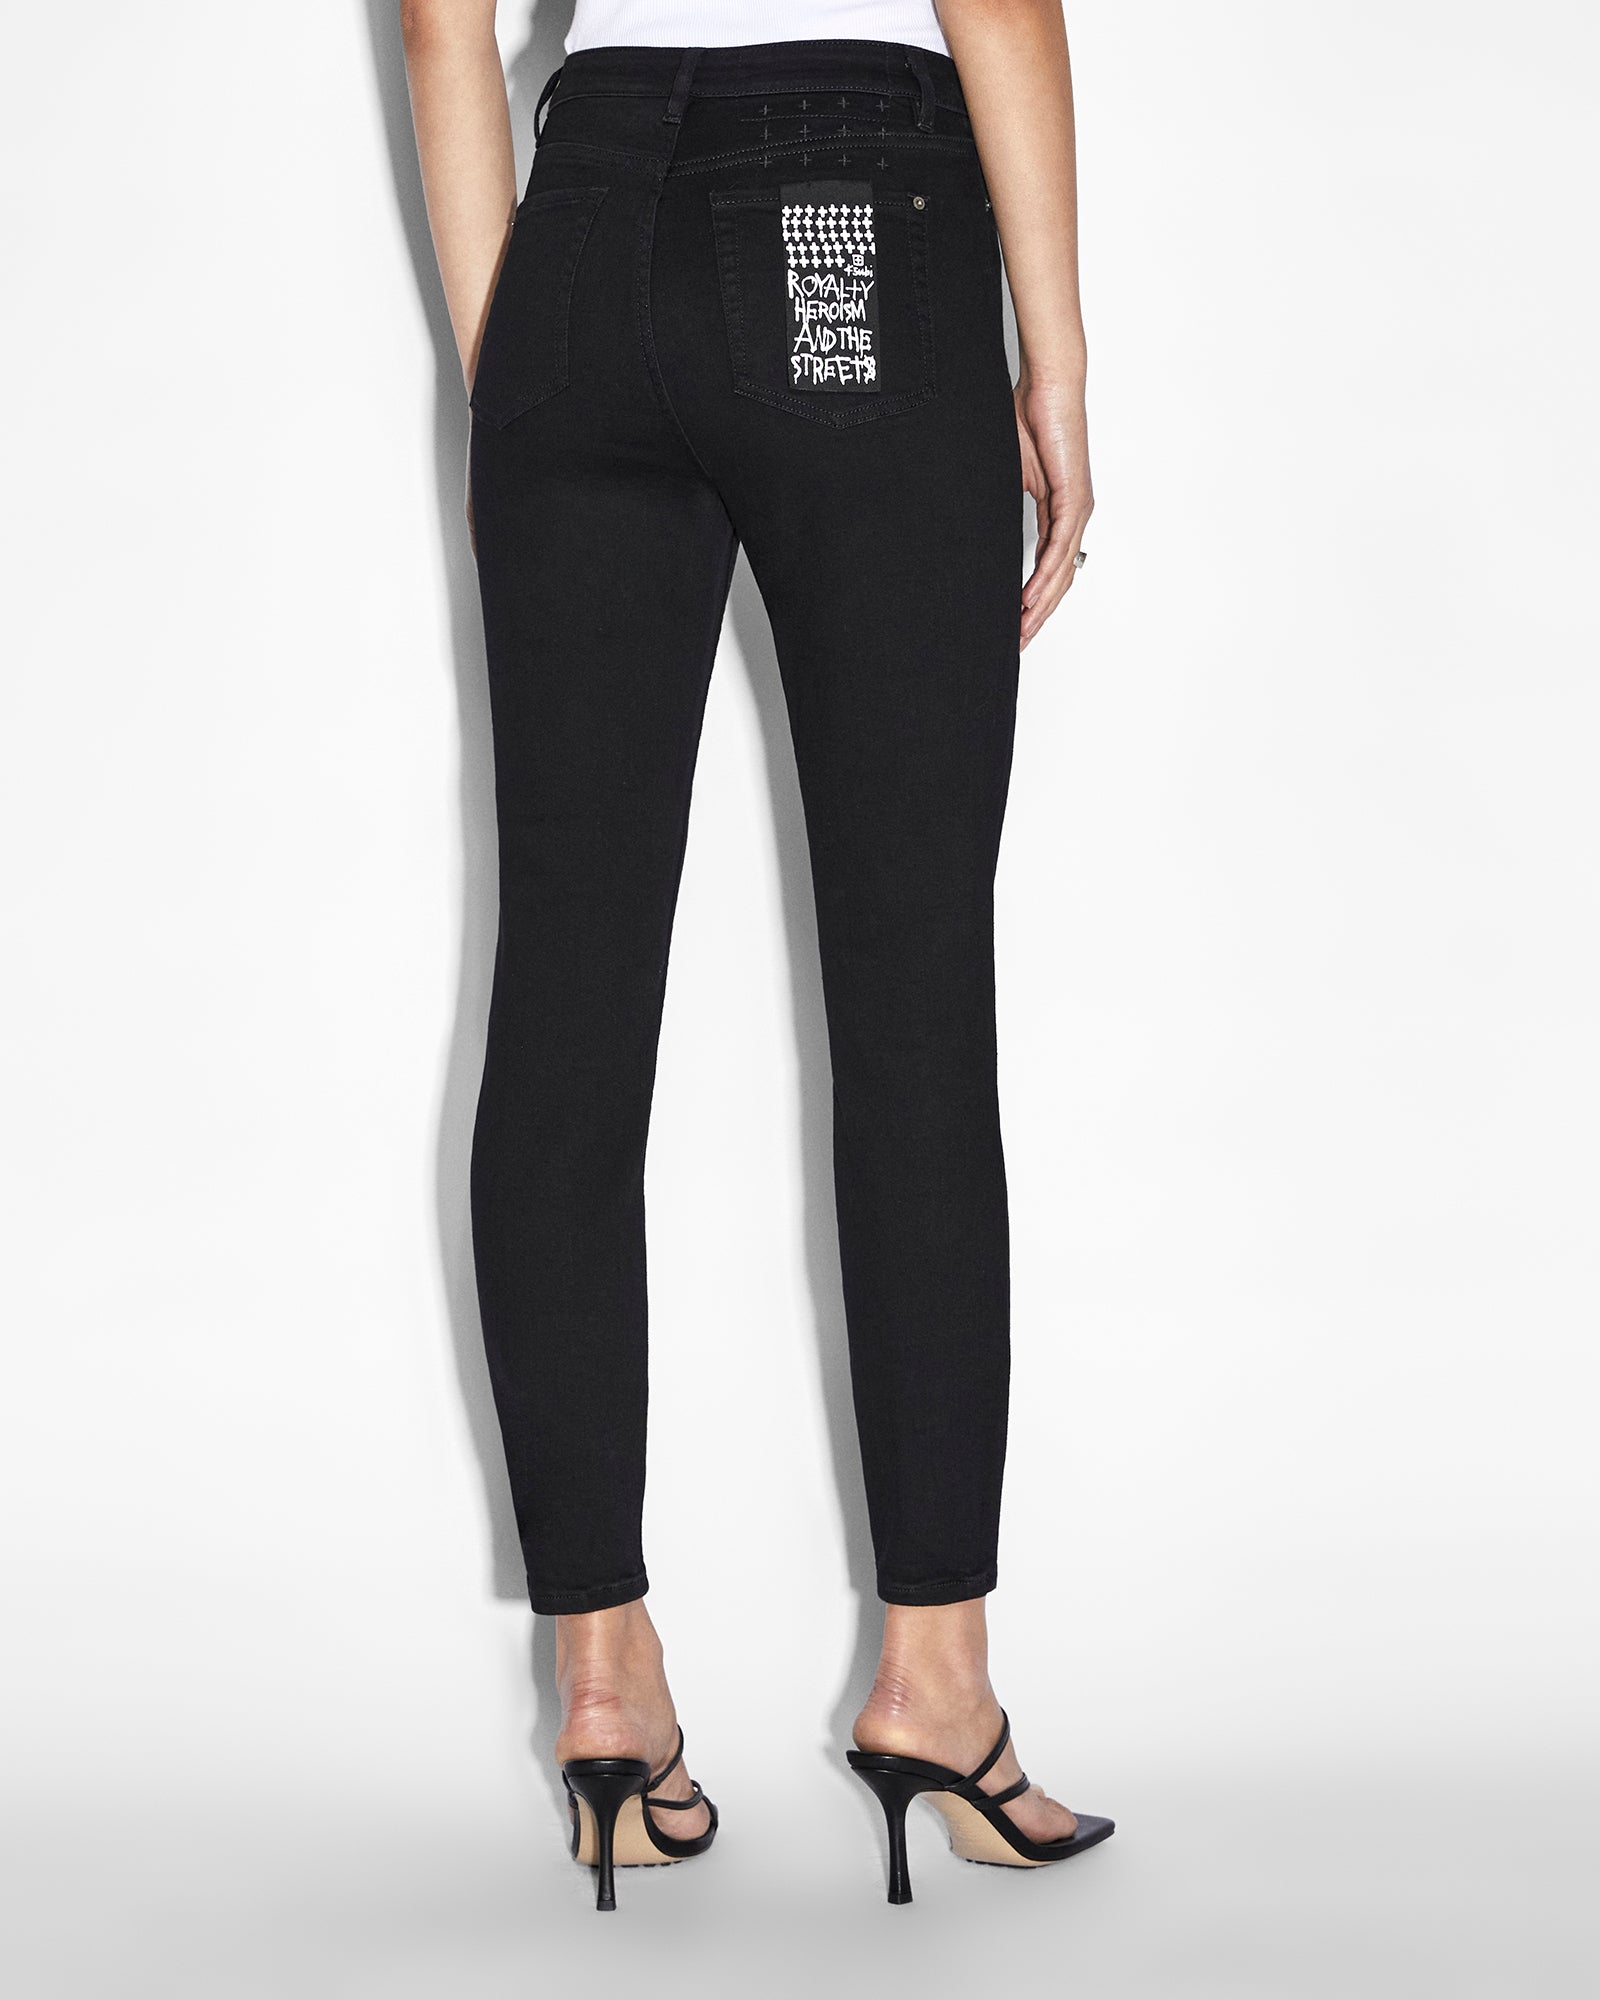 Buy Black Jeans & Jeggings for Women by Ginger by lifestyle Online |  Ajio.com